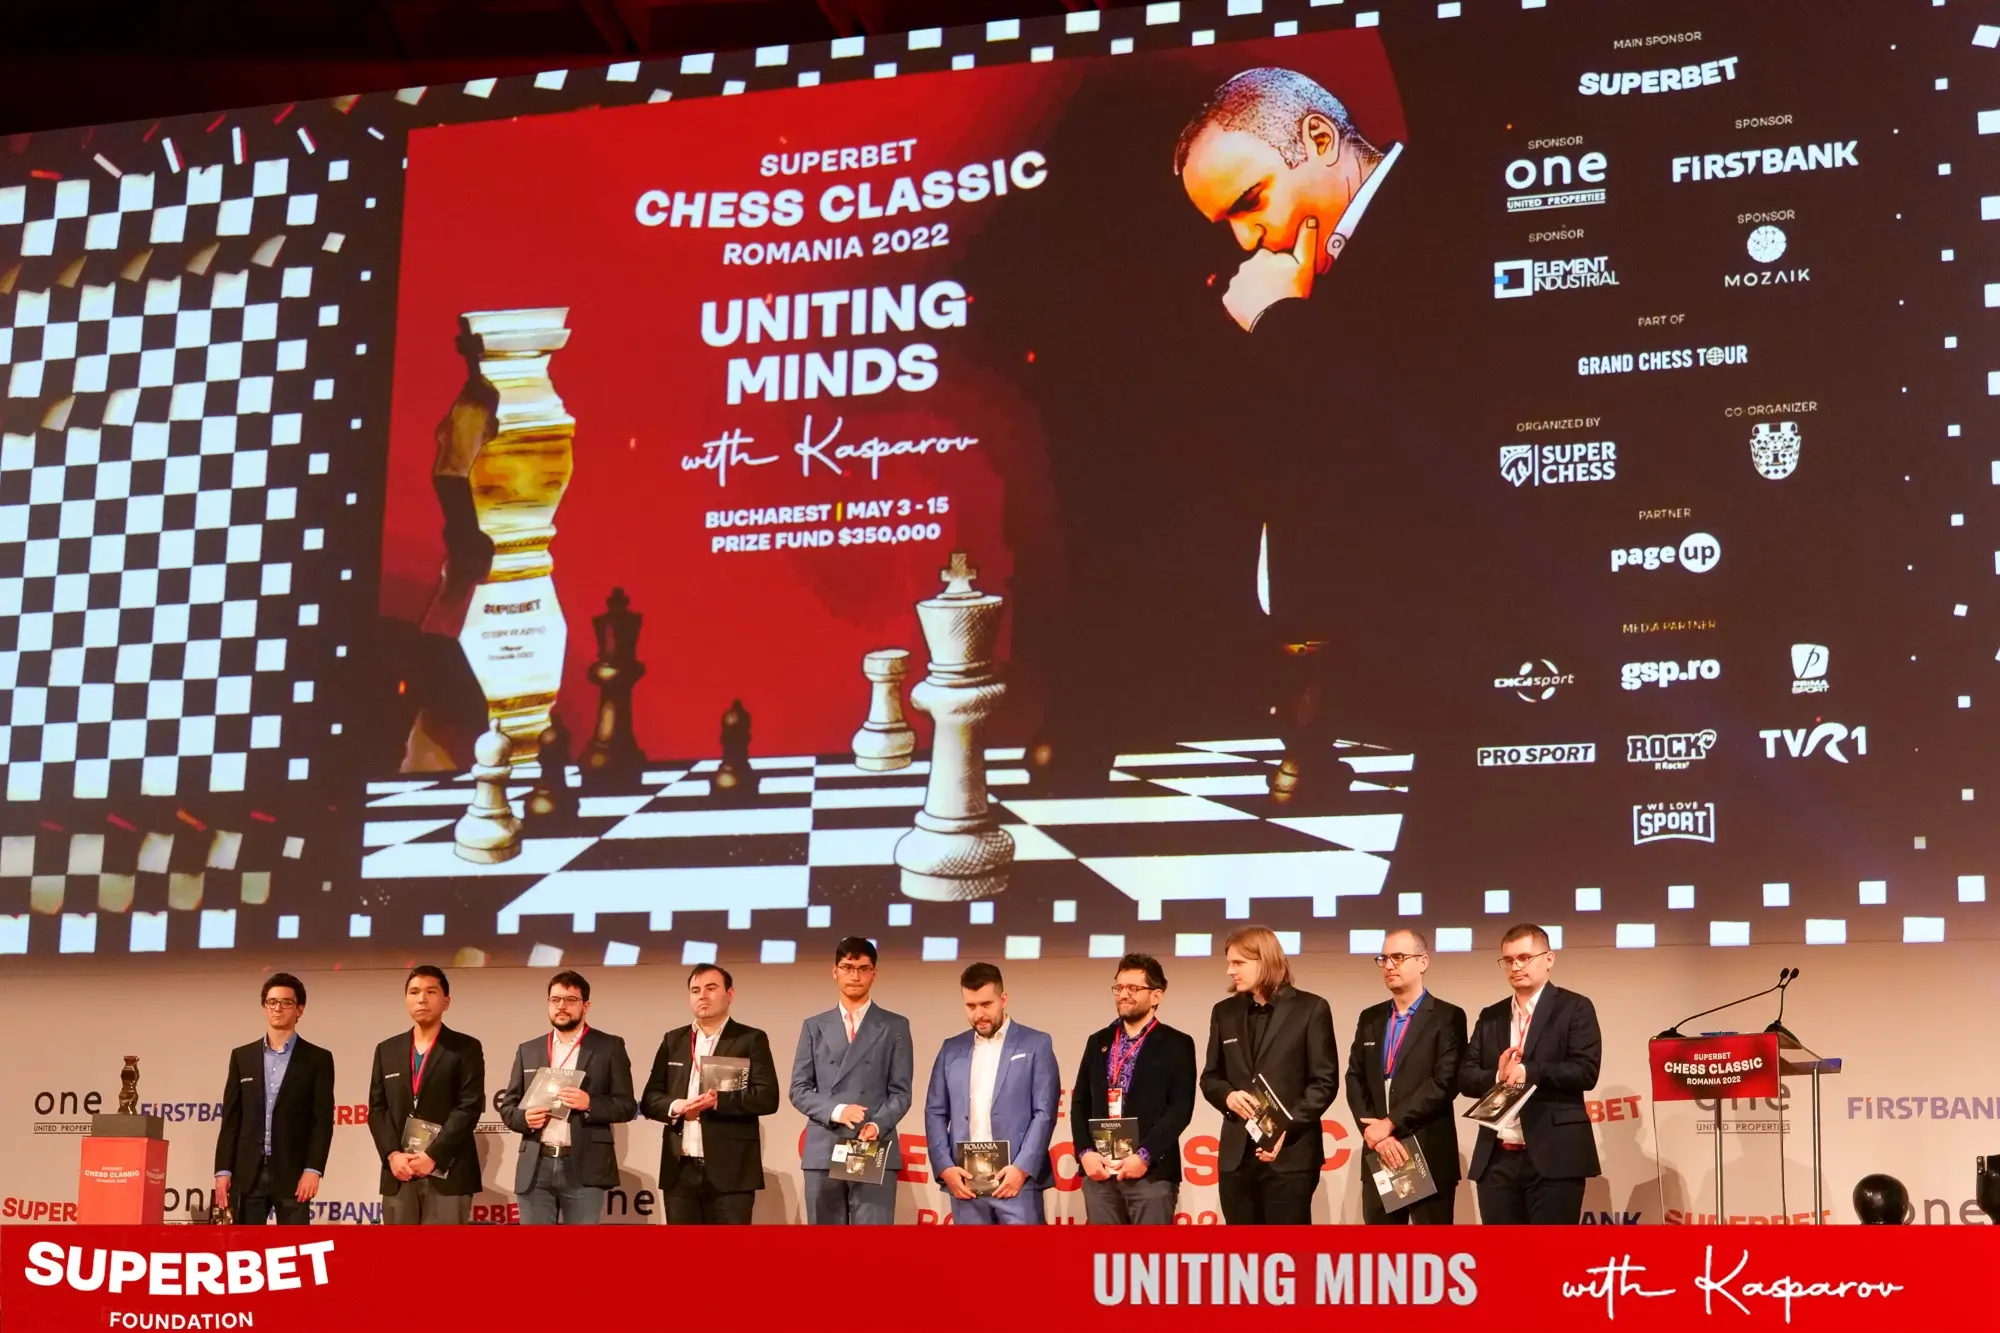 First Event of 2022 Grand Chess Tour Begins in Romania